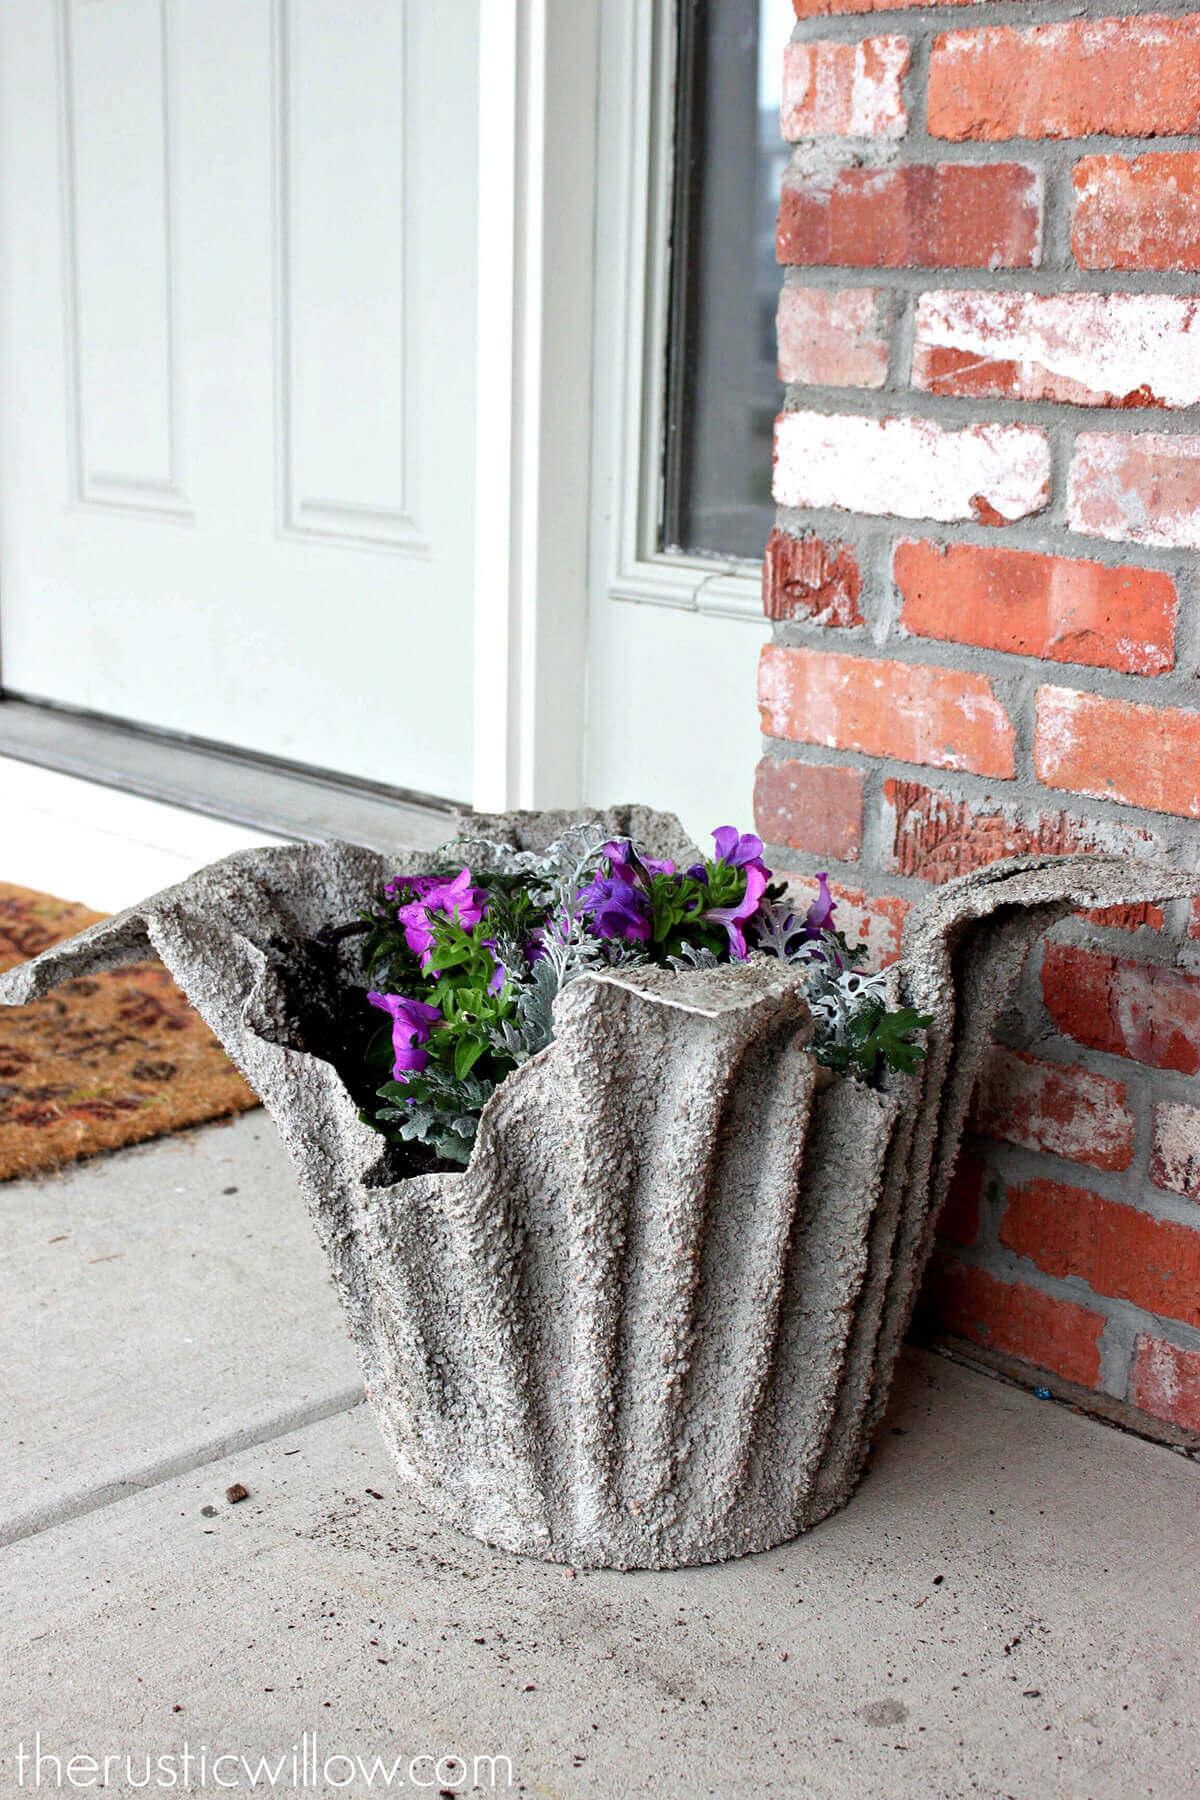 Garden Art DIY Project with Planters